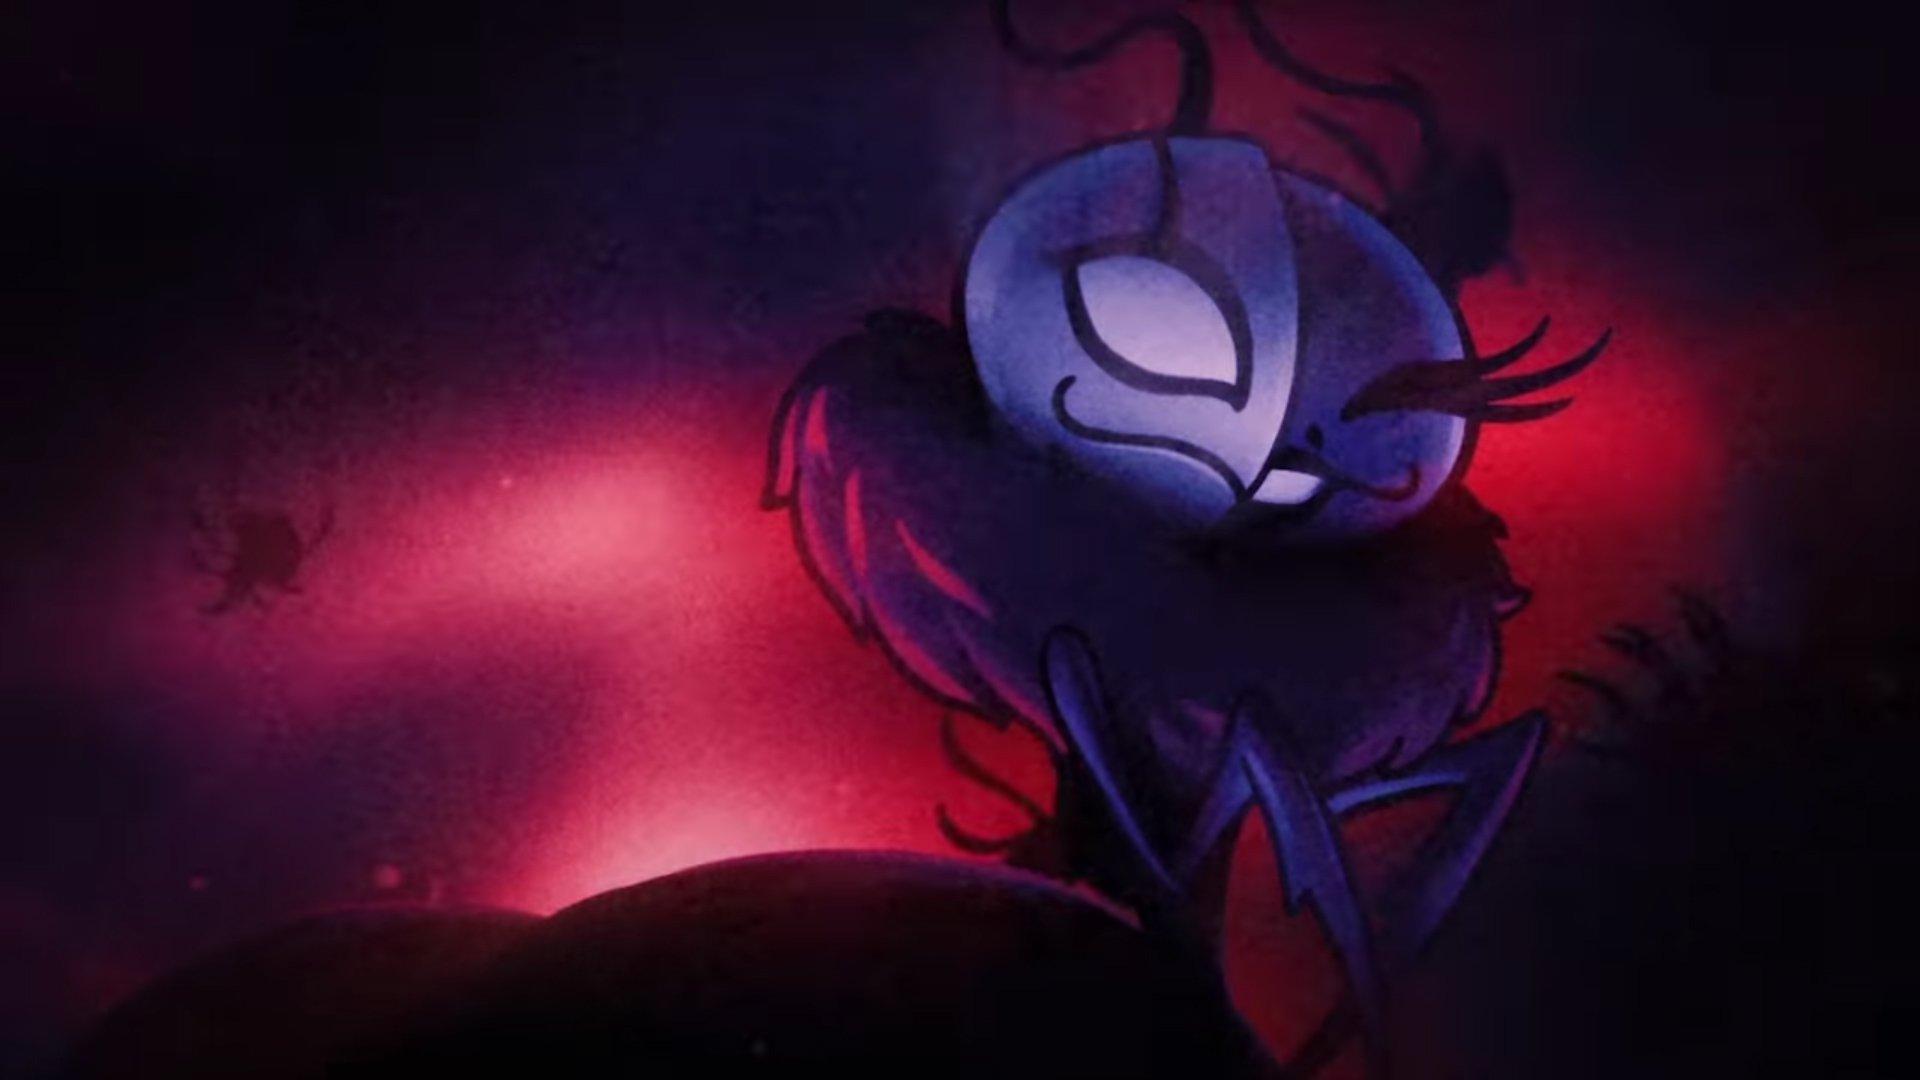 Hollow Knight's second free DLC is The Grimm Troupe